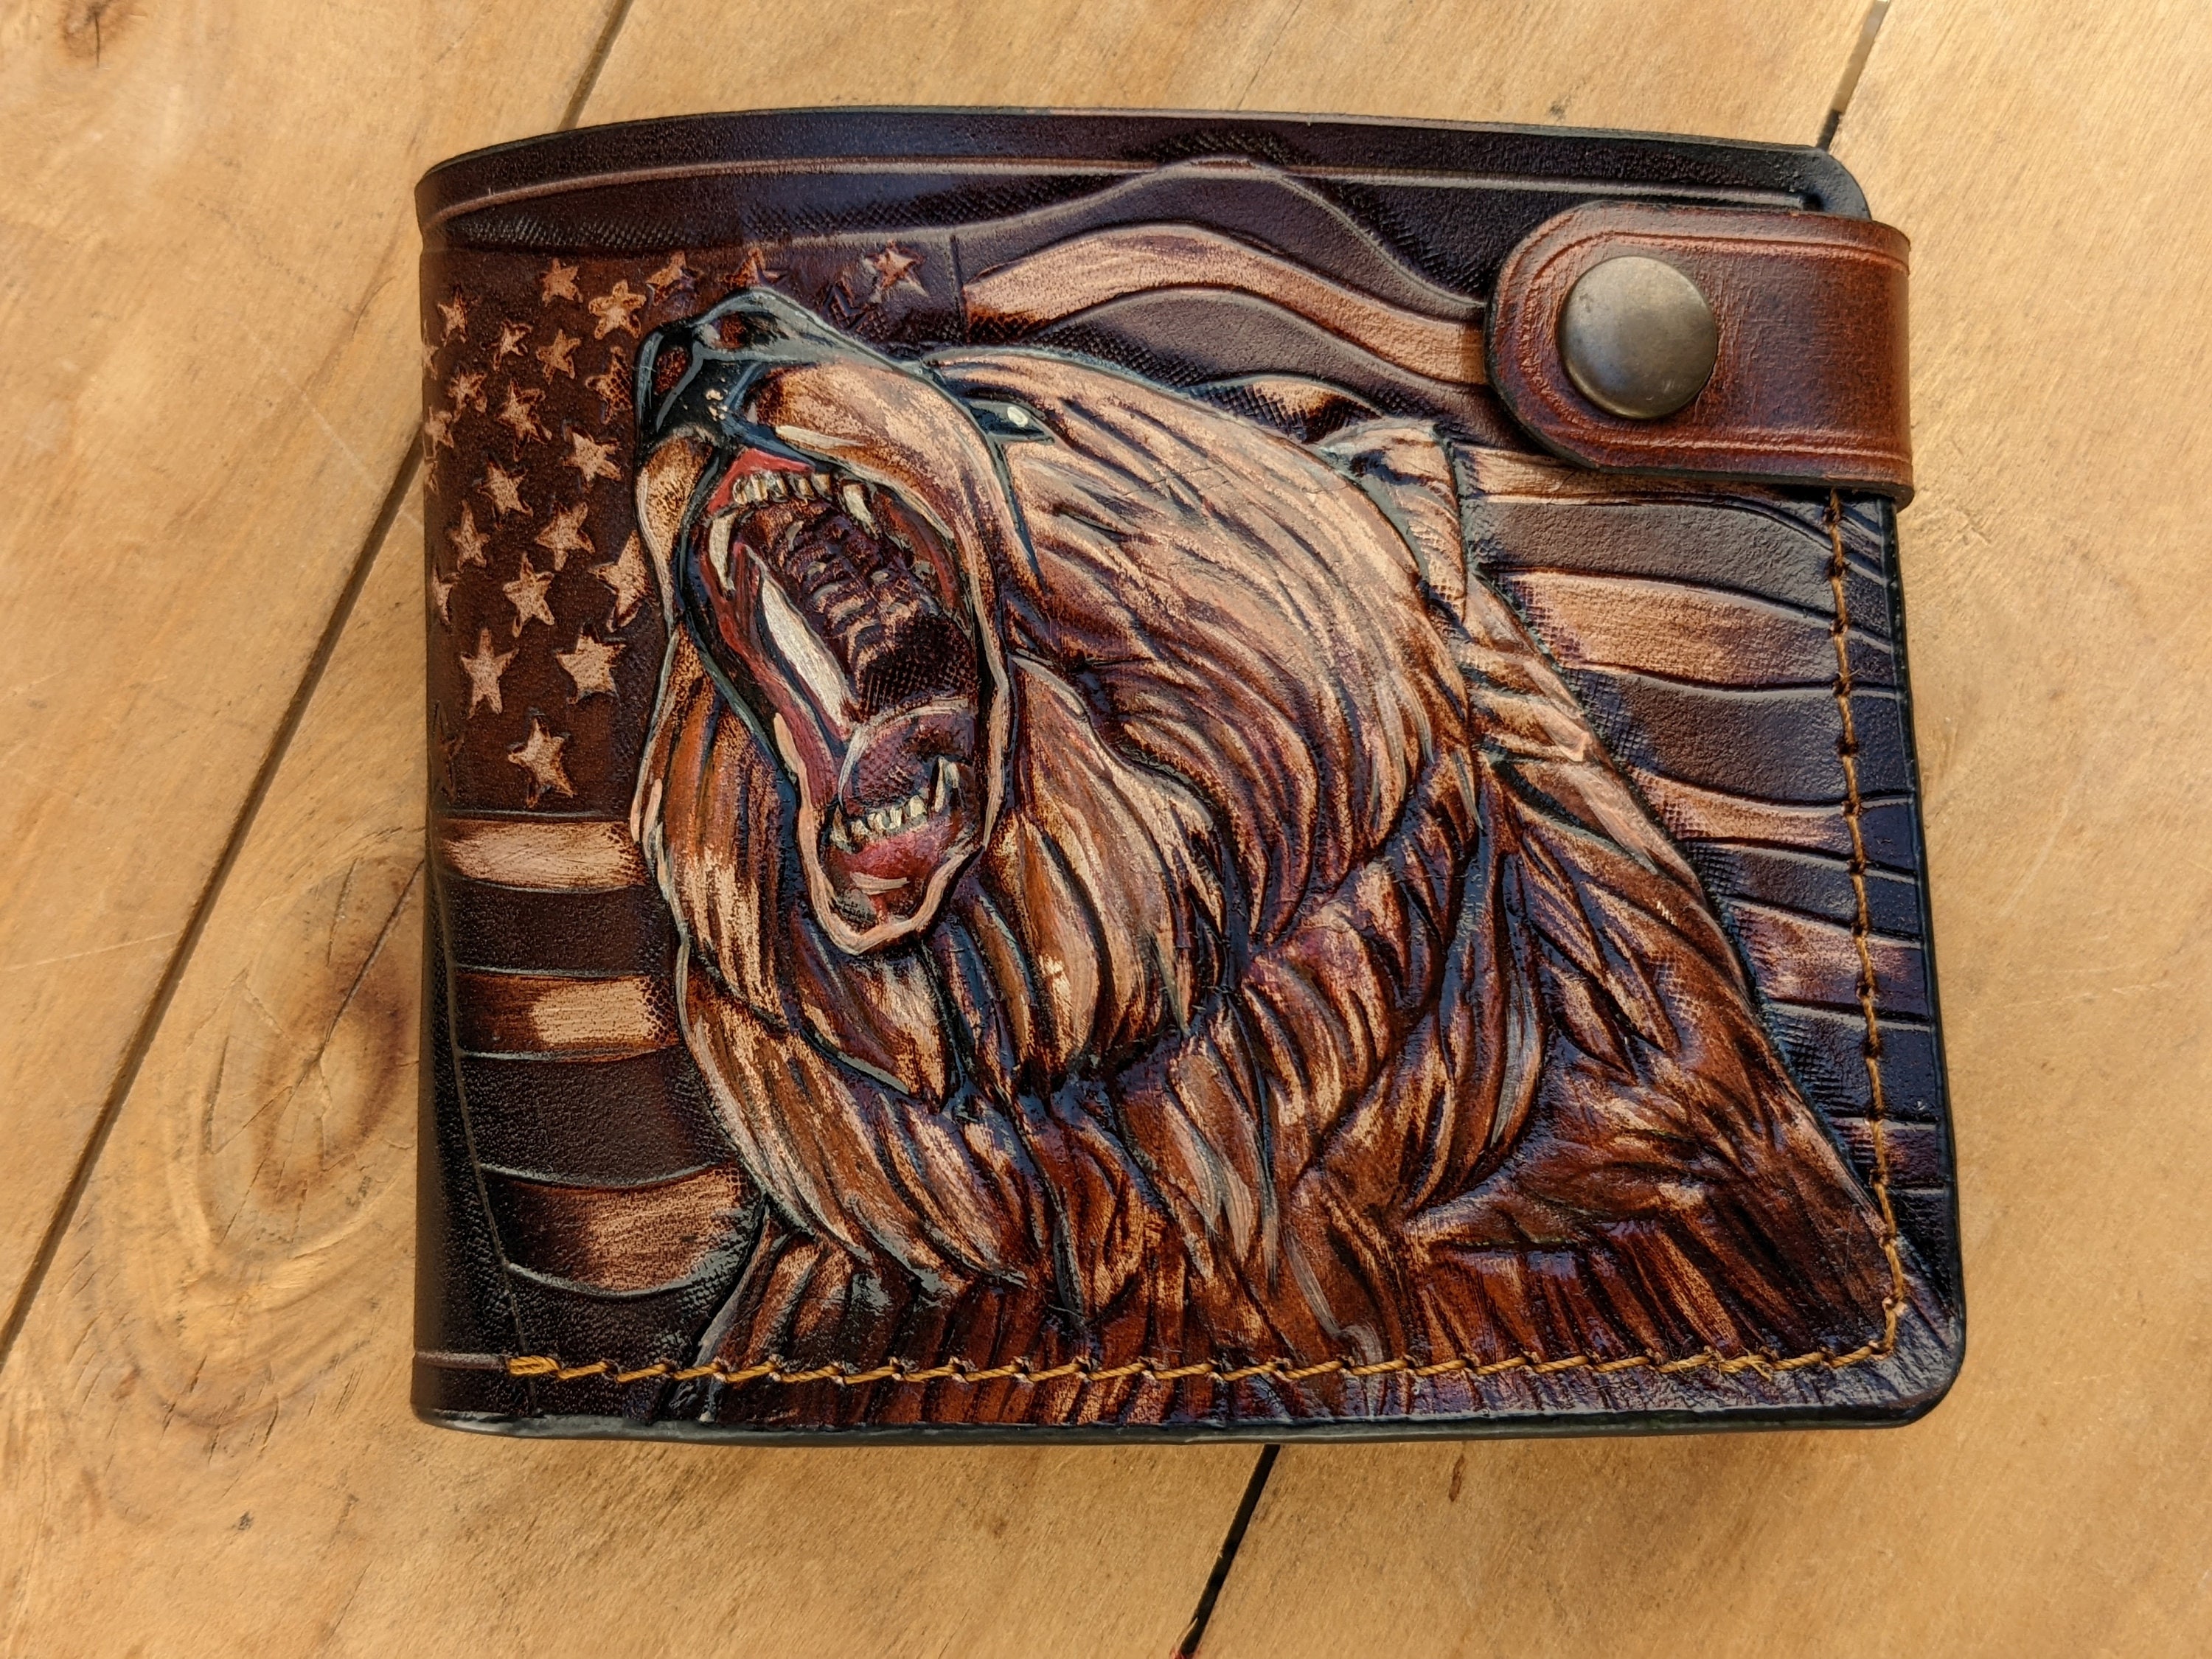 Personalised Leather Wallet with Coin Purse | Man & Bear